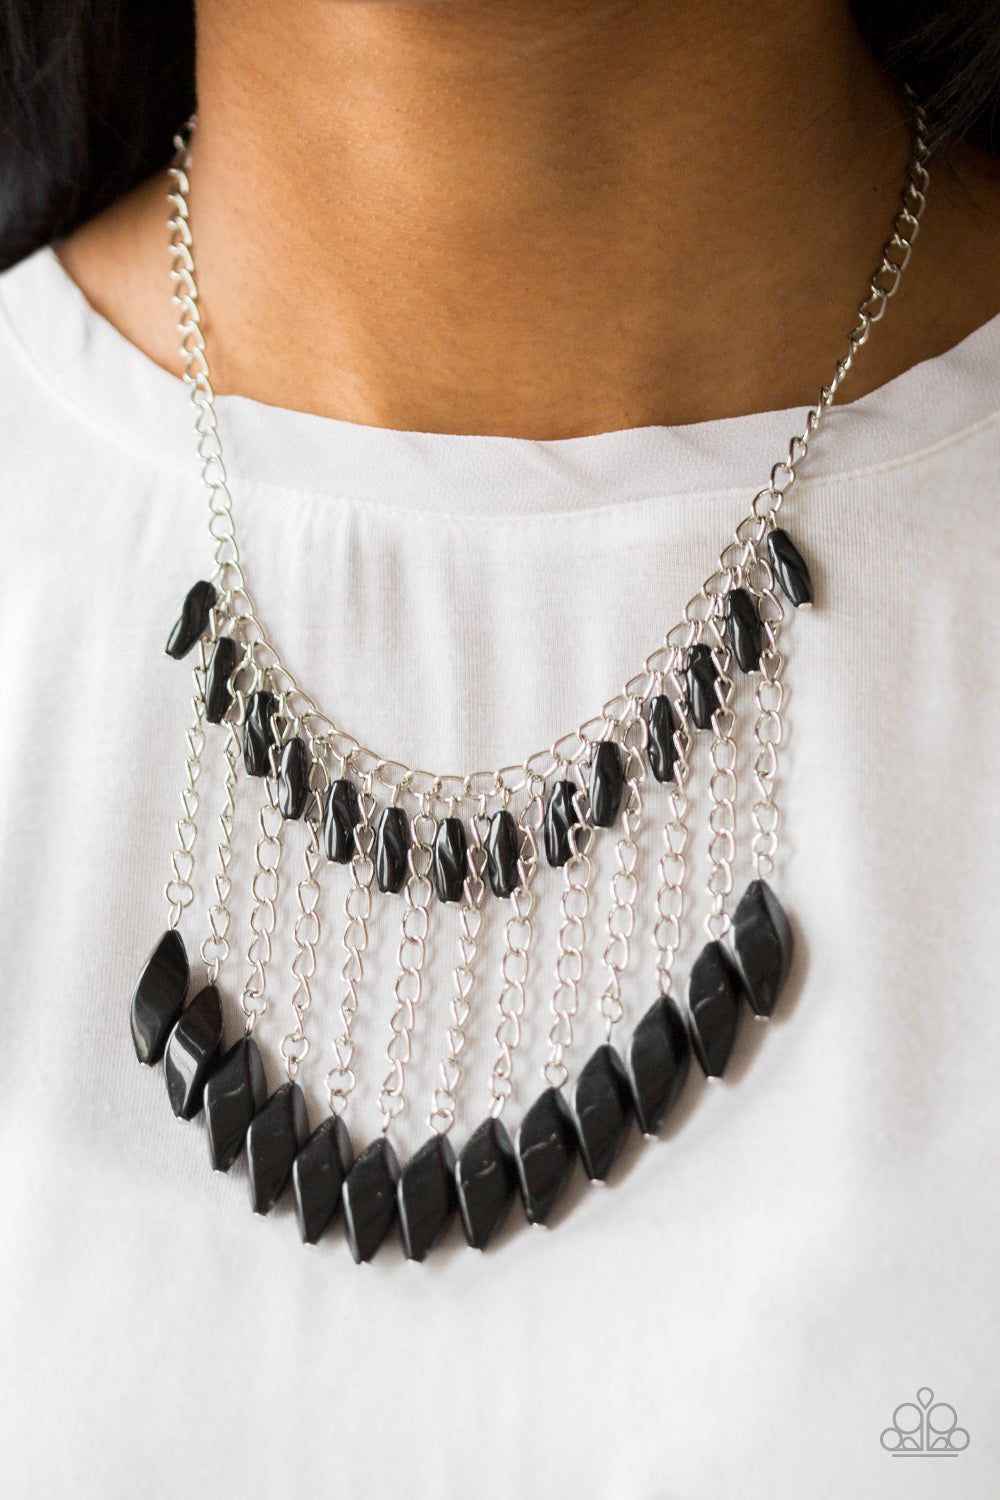 Venturous Vibes Paparazzi Accessories Necklace with Earrings